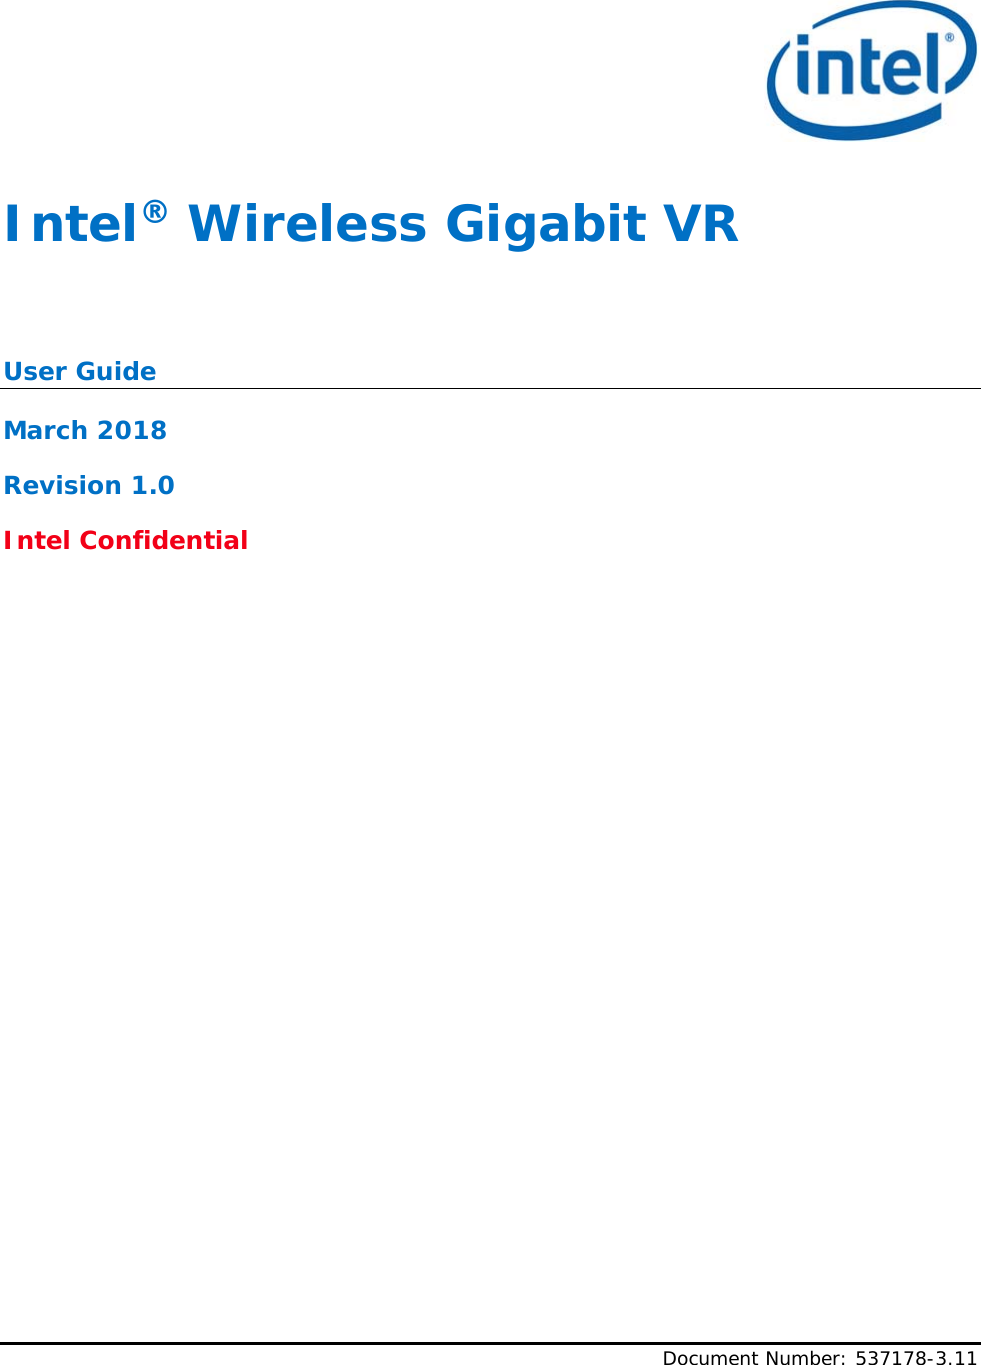        Document Number: 537178-3.11 Intel® Wireless Gigabit VR  User Guide March 2018 Revision 1.0 Intel Confidential  